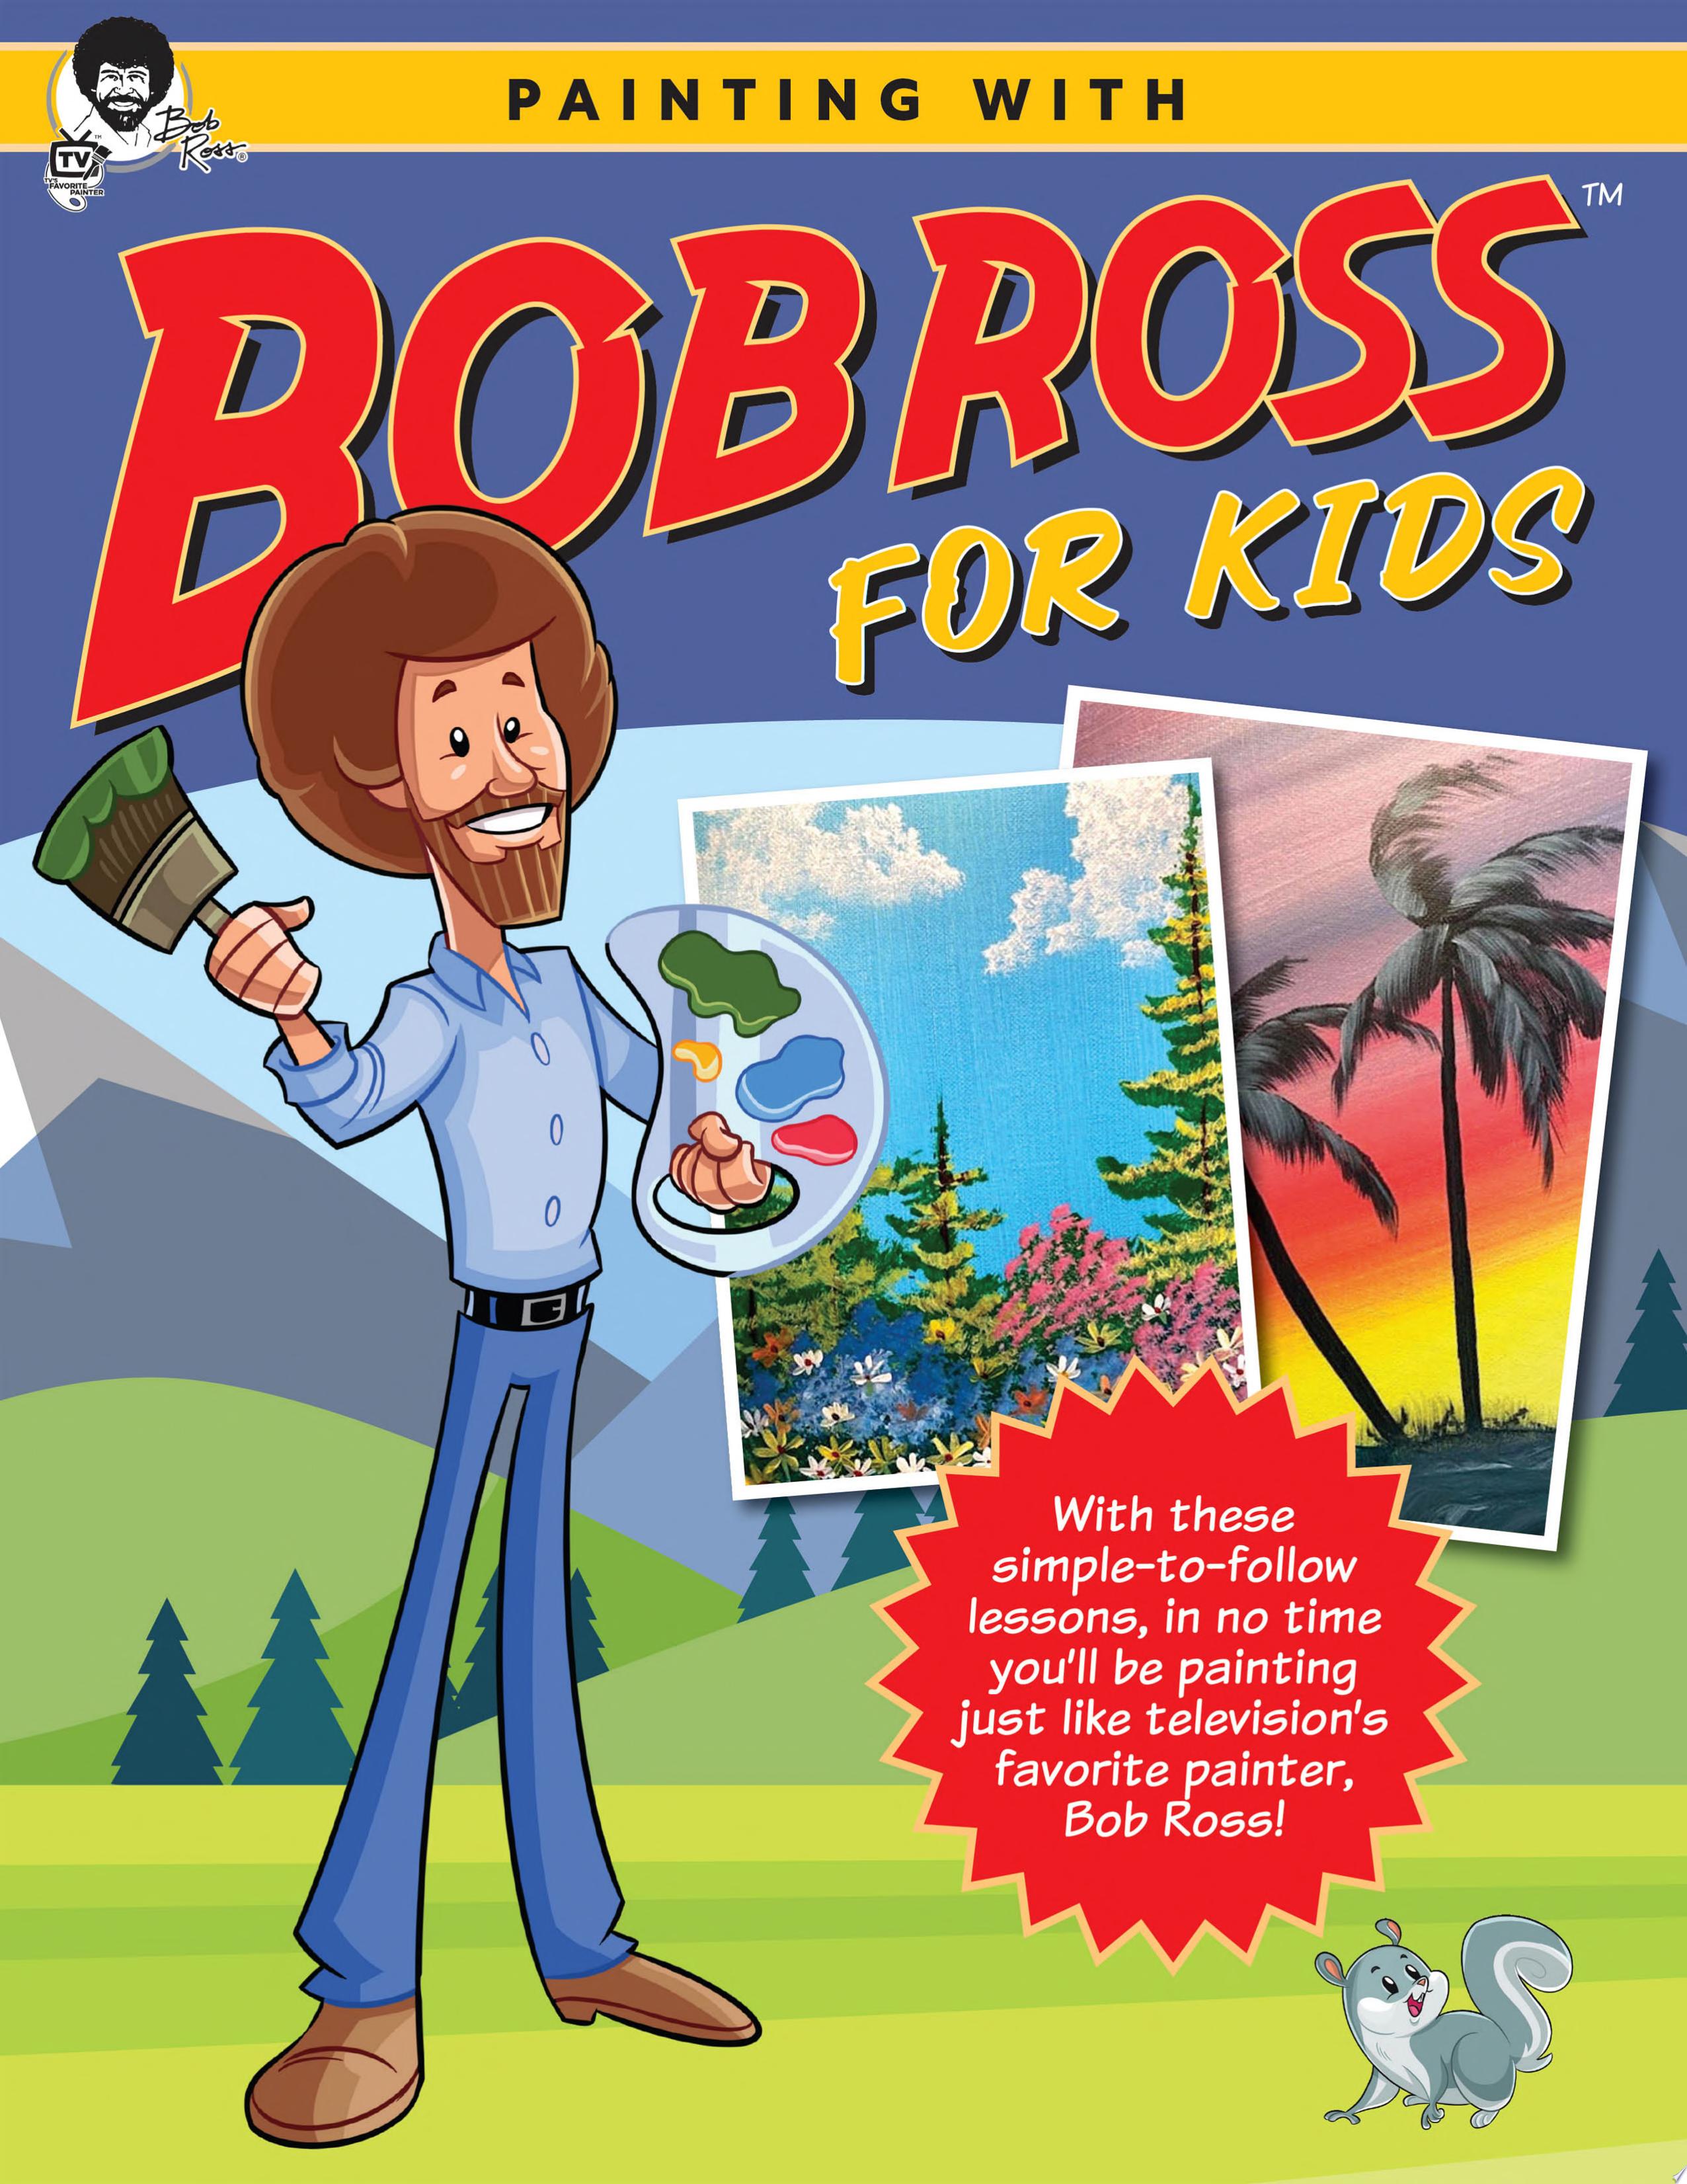 Image for "Painting with Bob Ross for Kids"